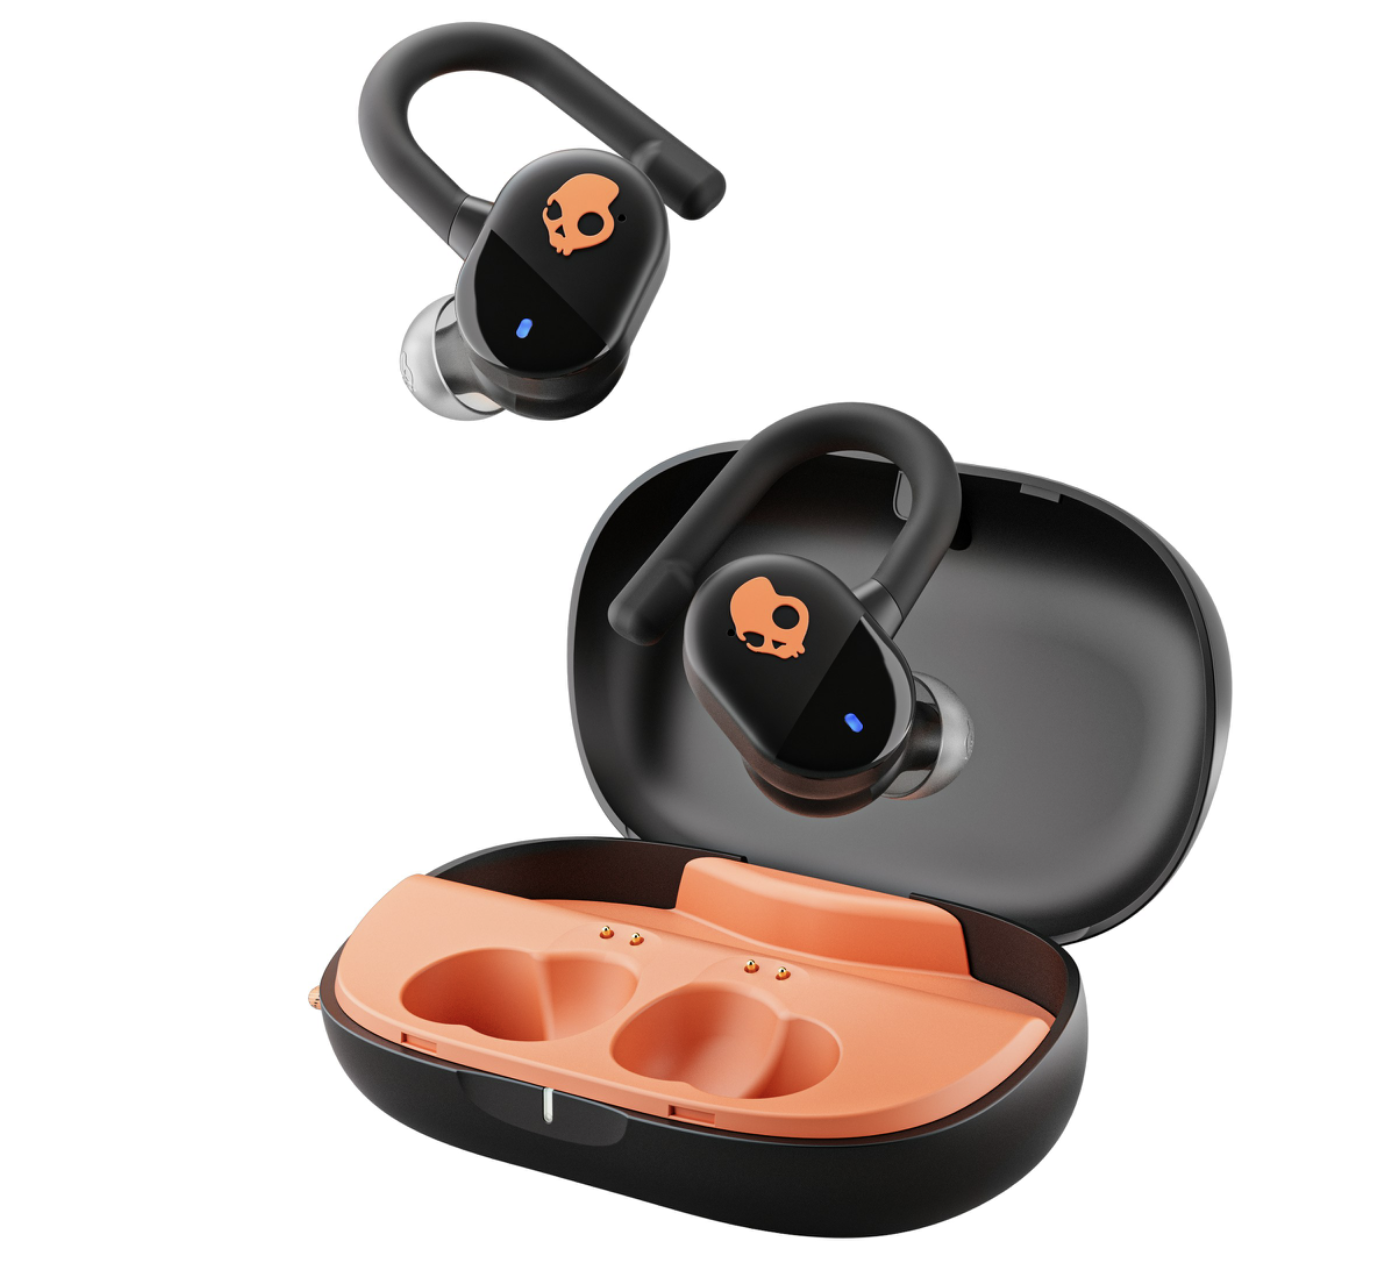 Push Play Active earbuds and charging case